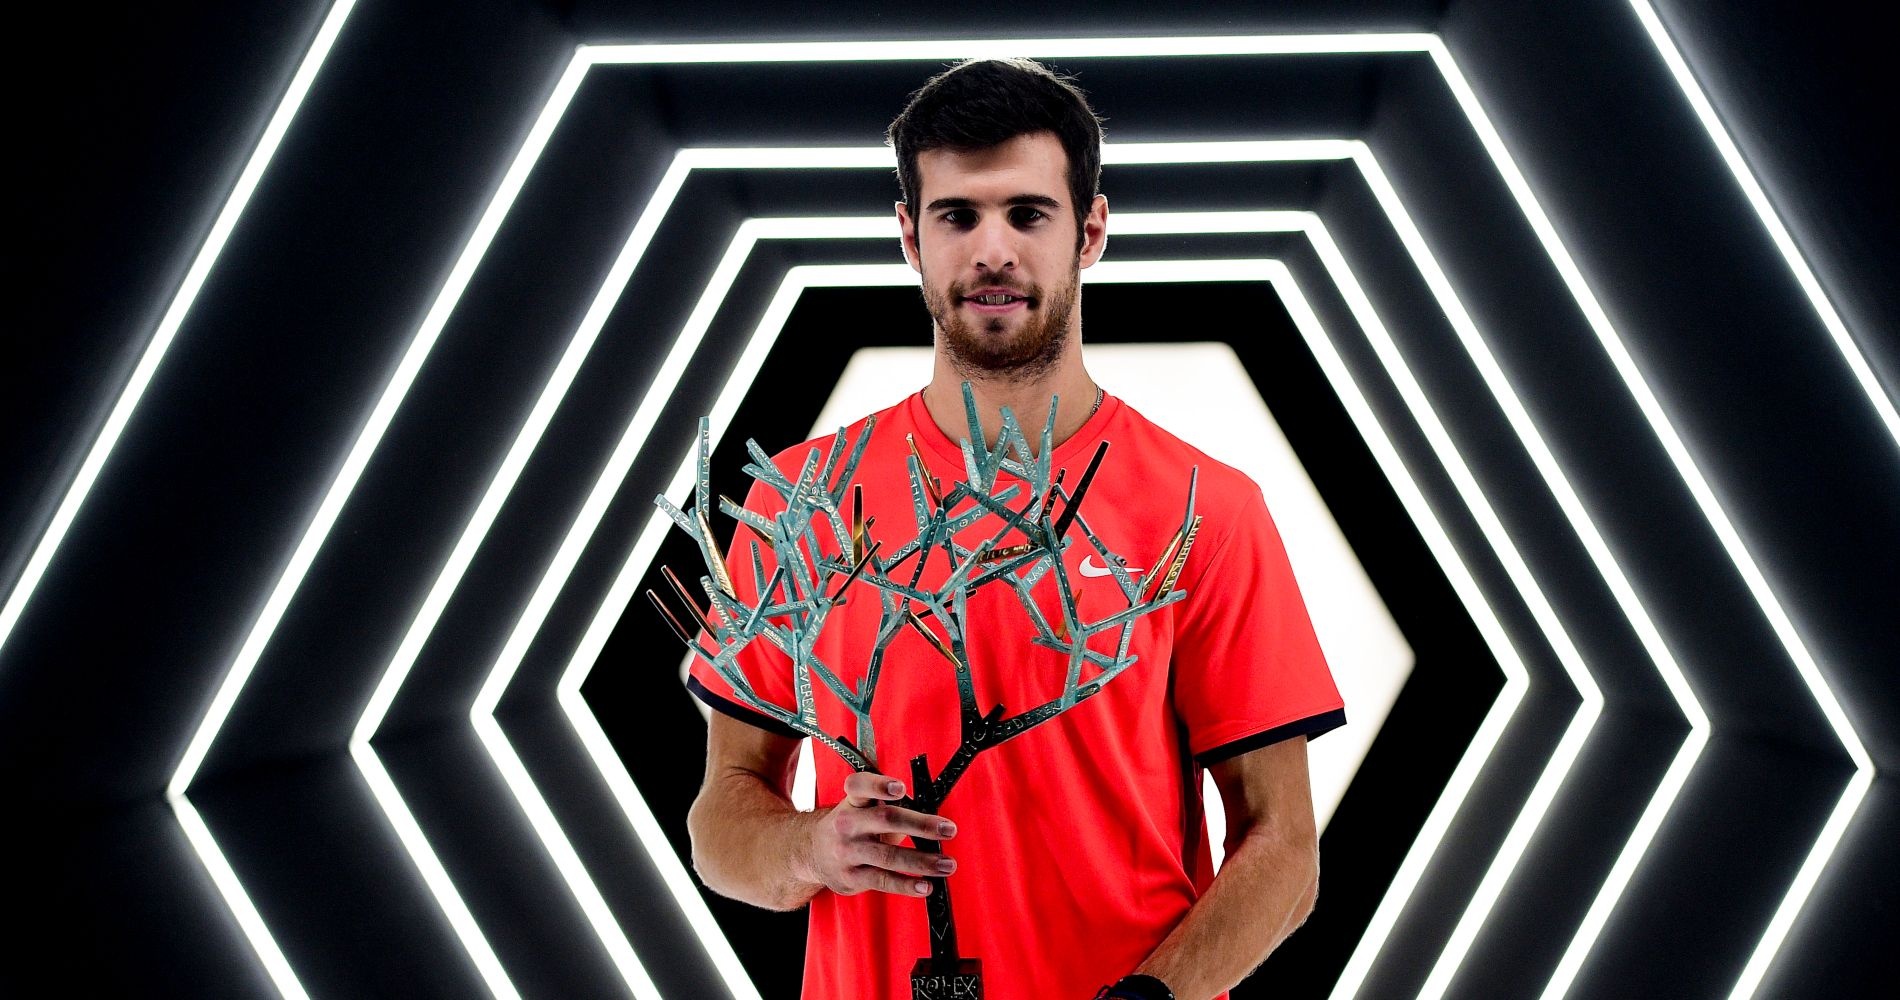 Everything you always wanted to know about Karen Khachanov